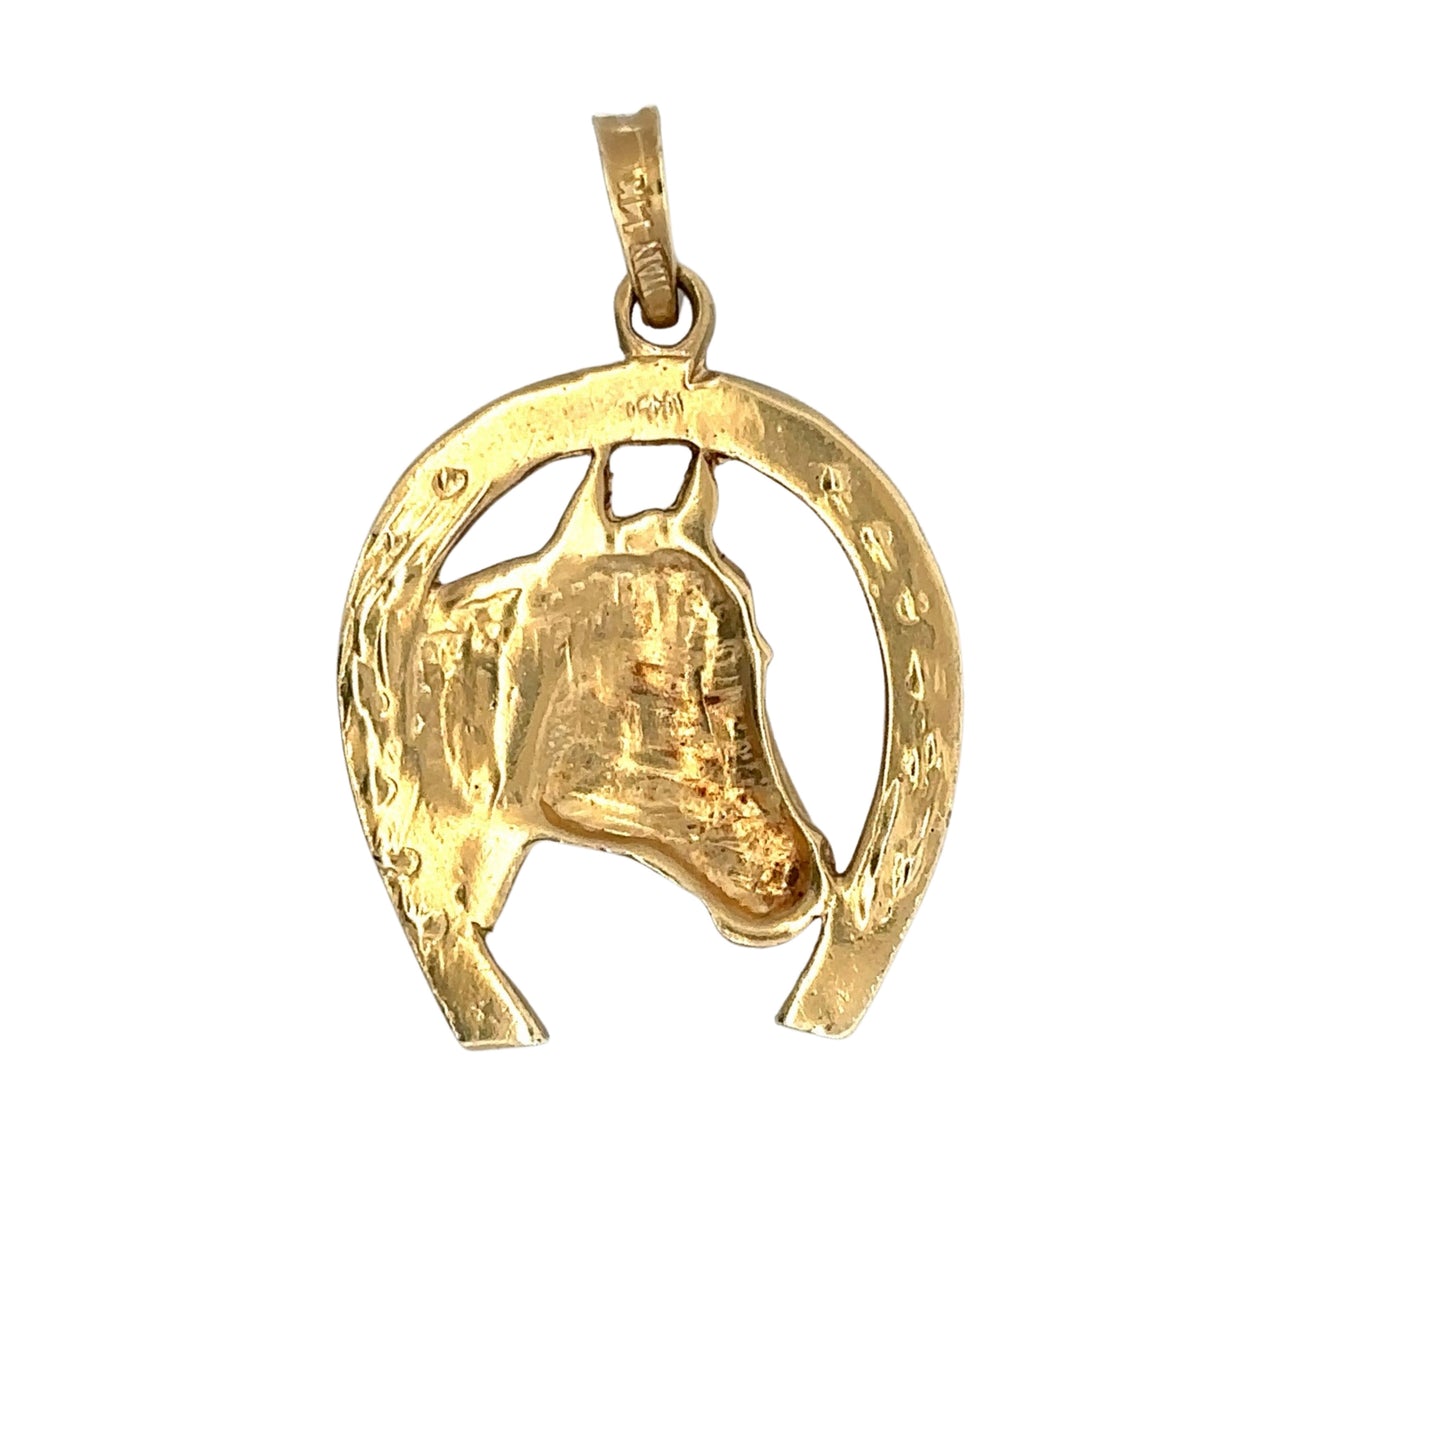 Back of horse shoe pendant with 14K stamp on bail + signs of wear on the gold.